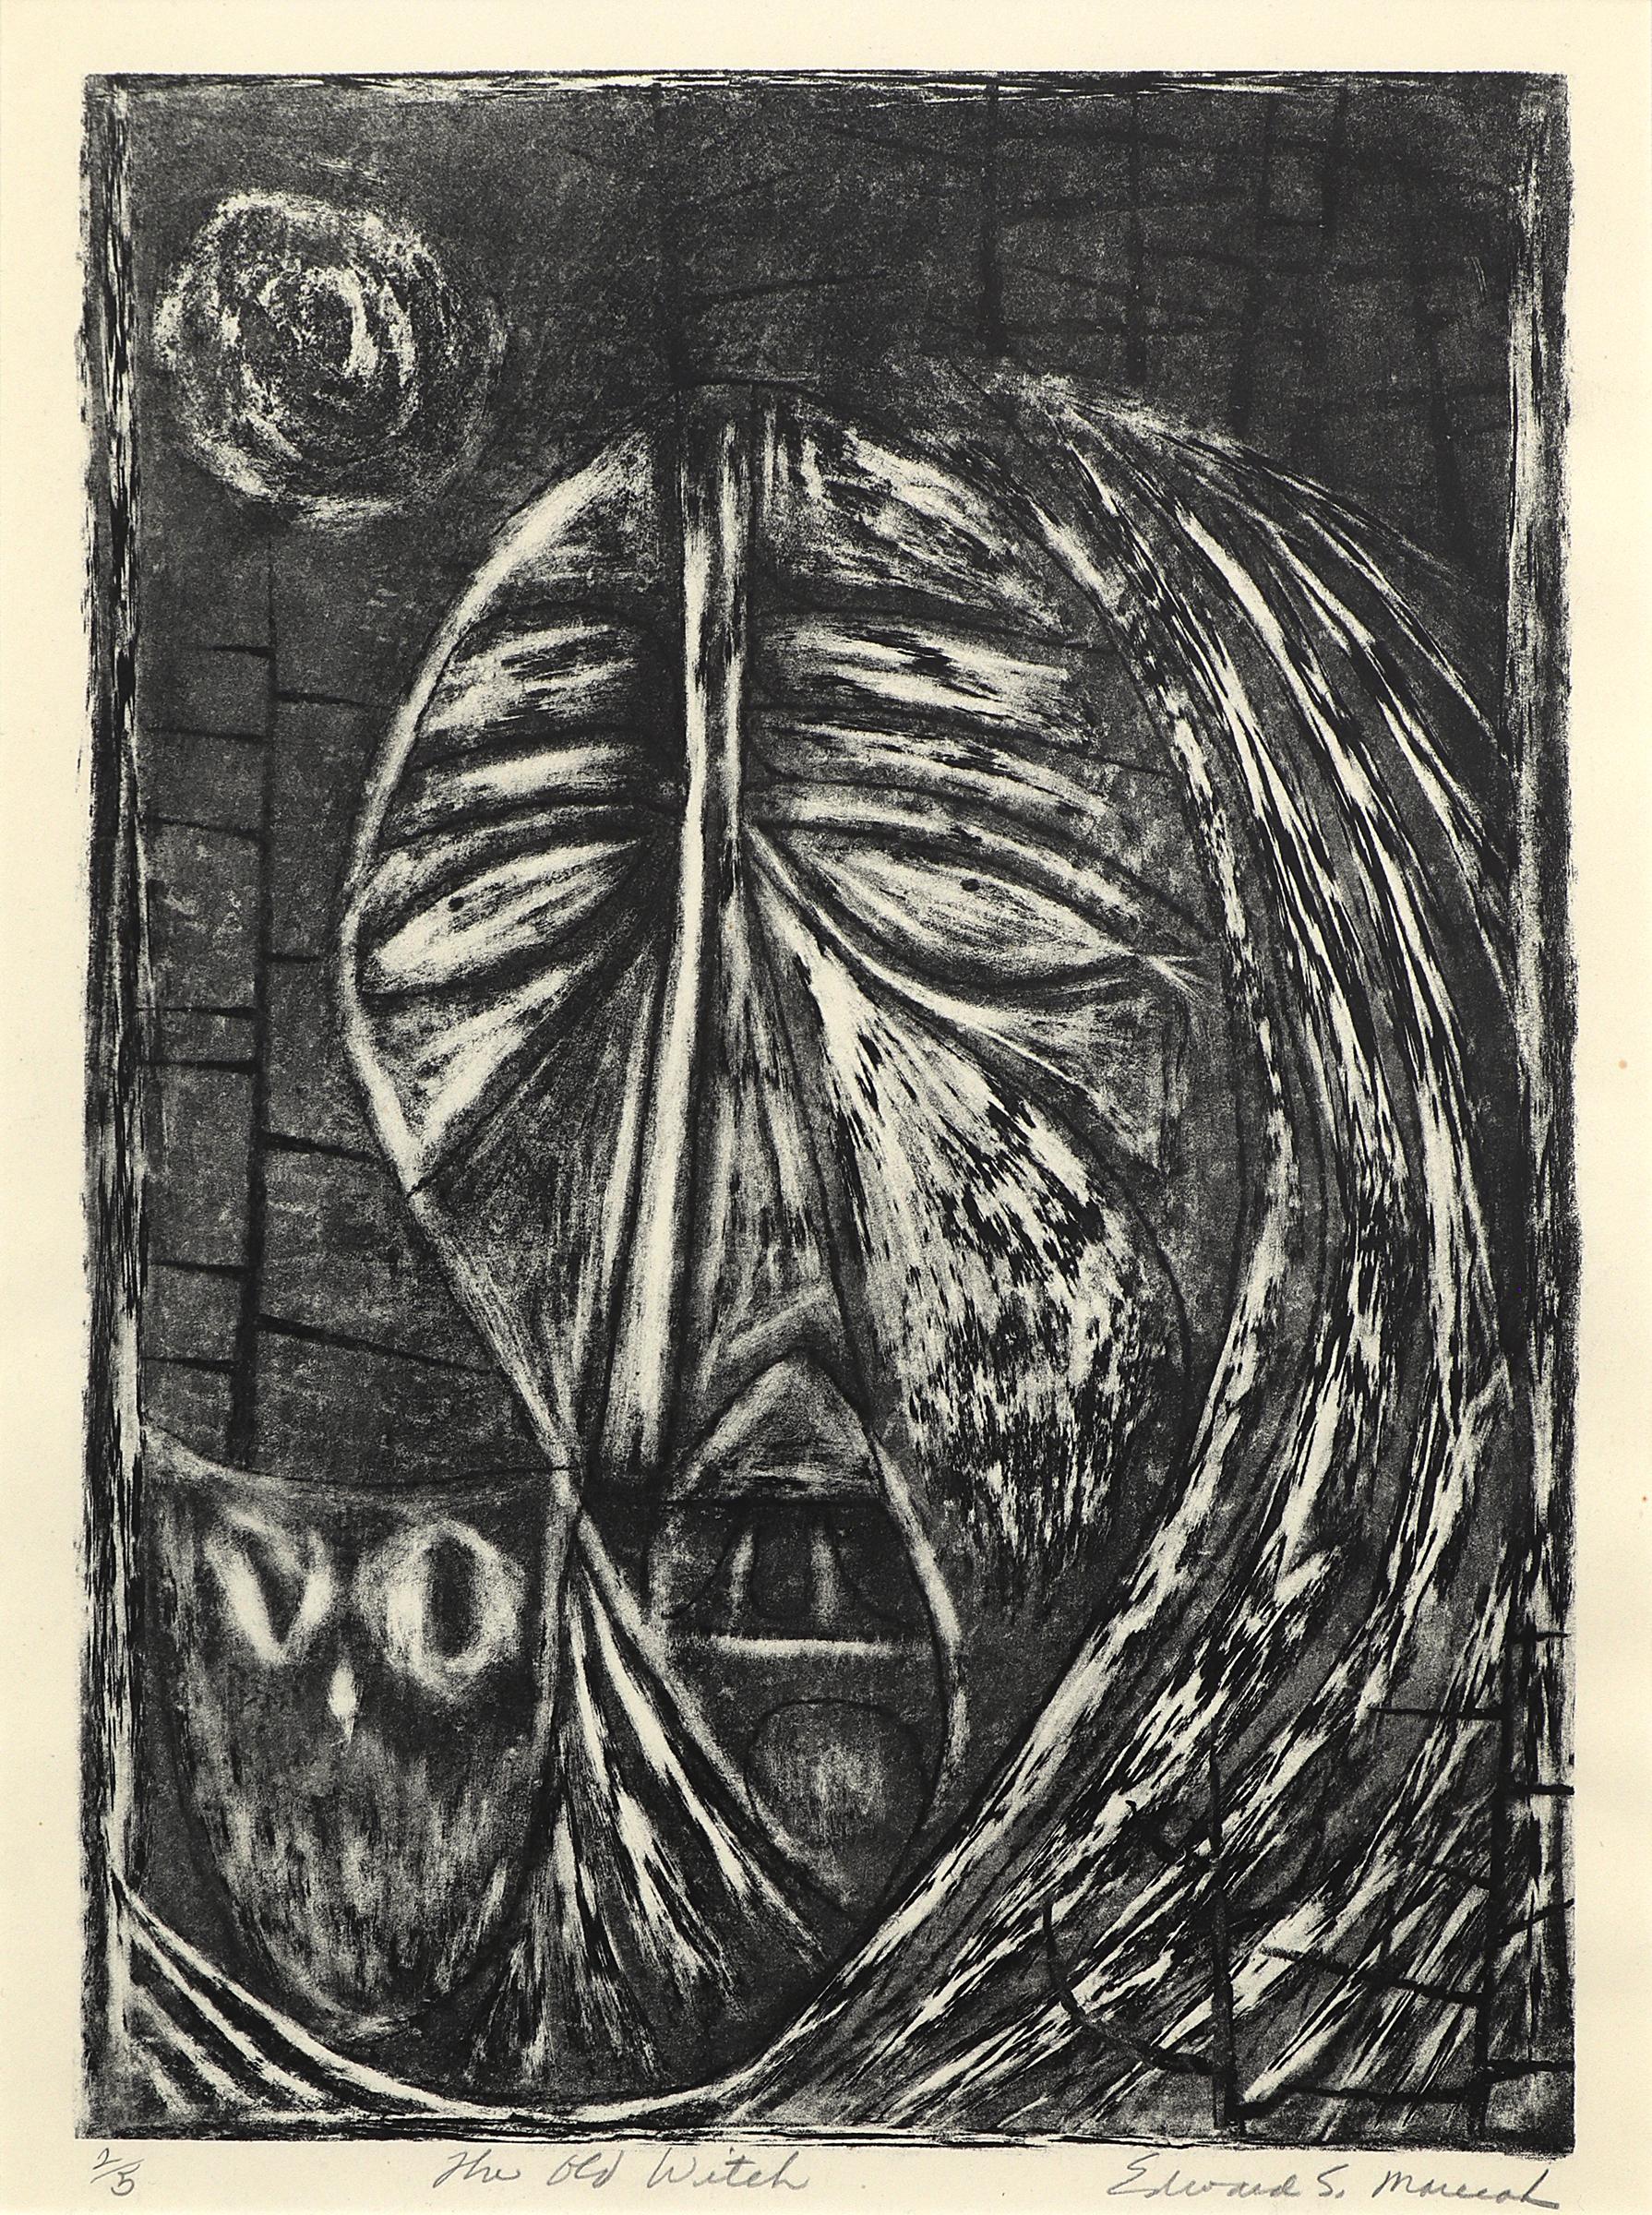 The Old Witch (Ed's Last Litho) (2/5), Framed 1940s Lithograph Abstract Portrait - Print by Edward Marecak